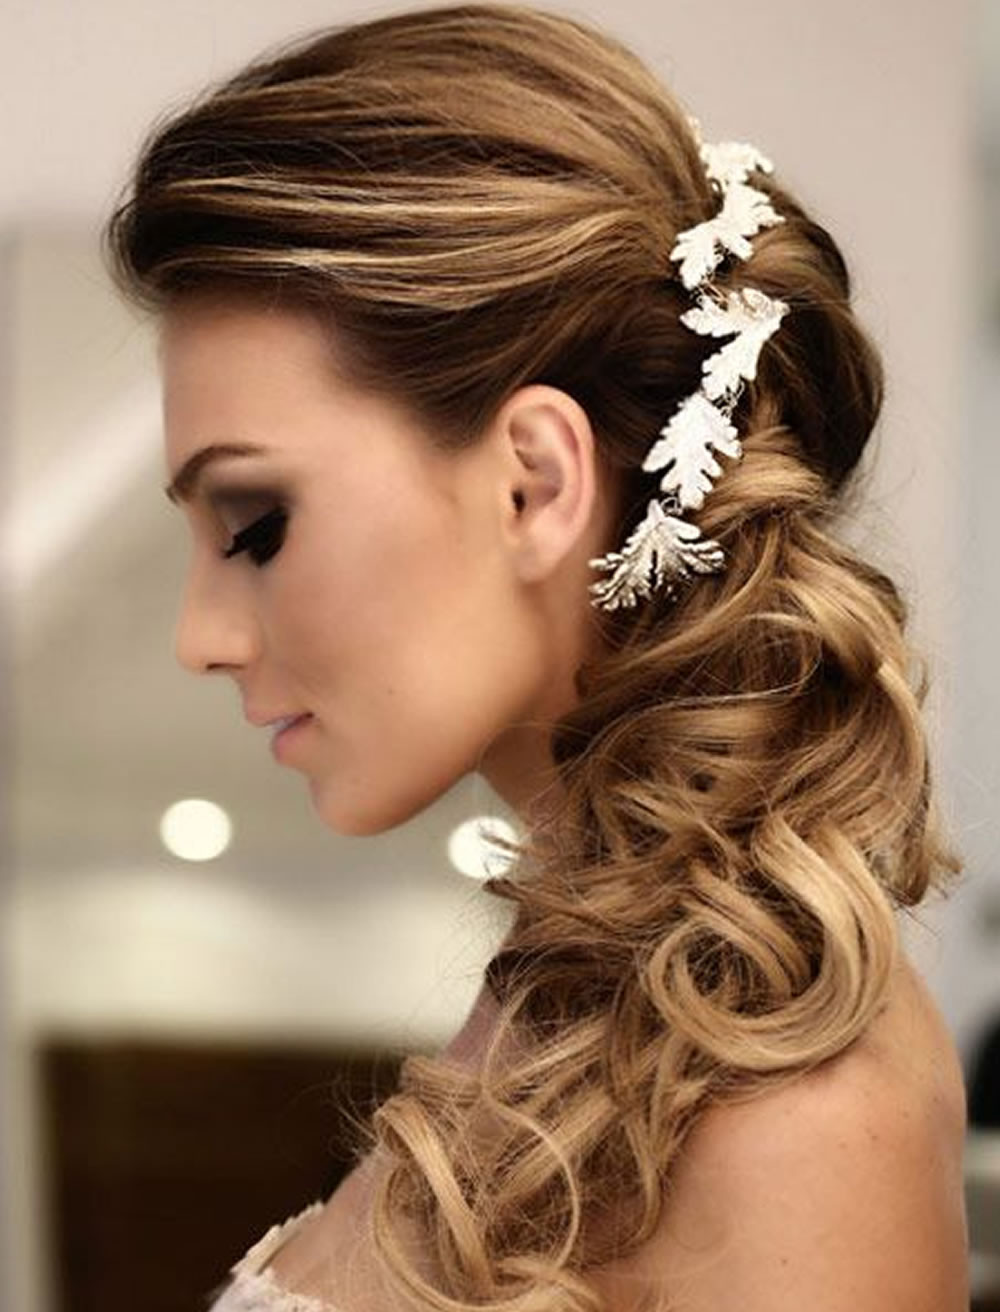 Hairstyles For Bridesmaids 2019
 Very Stylish Wedding Hairstyles for Long Hair 2018 2019